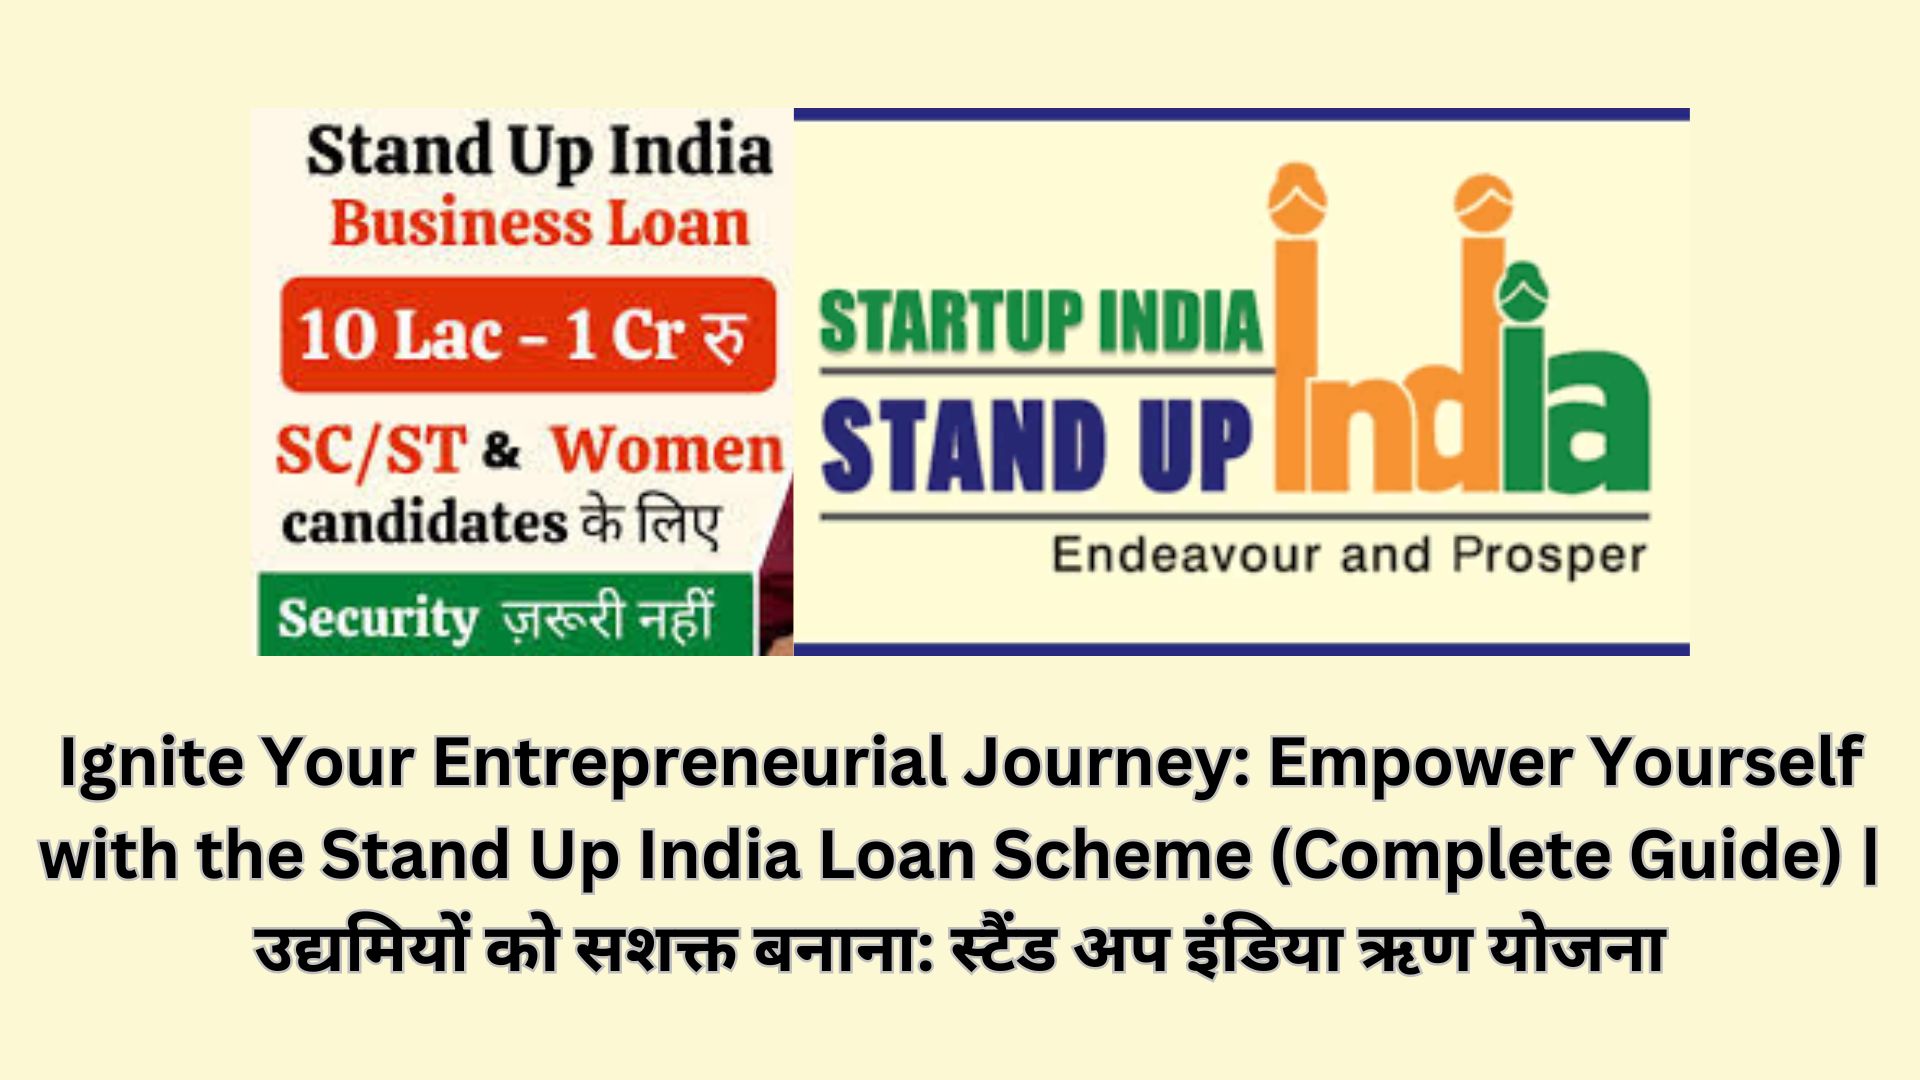 Ignite Your Entrepreneurial Journey: Empower Yourself with the Stand Up India Loan Scheme (Complete Guide) | उद्यमियों को सशक्त बनाना: स्टैंड अप इंडिया ऋण योजना